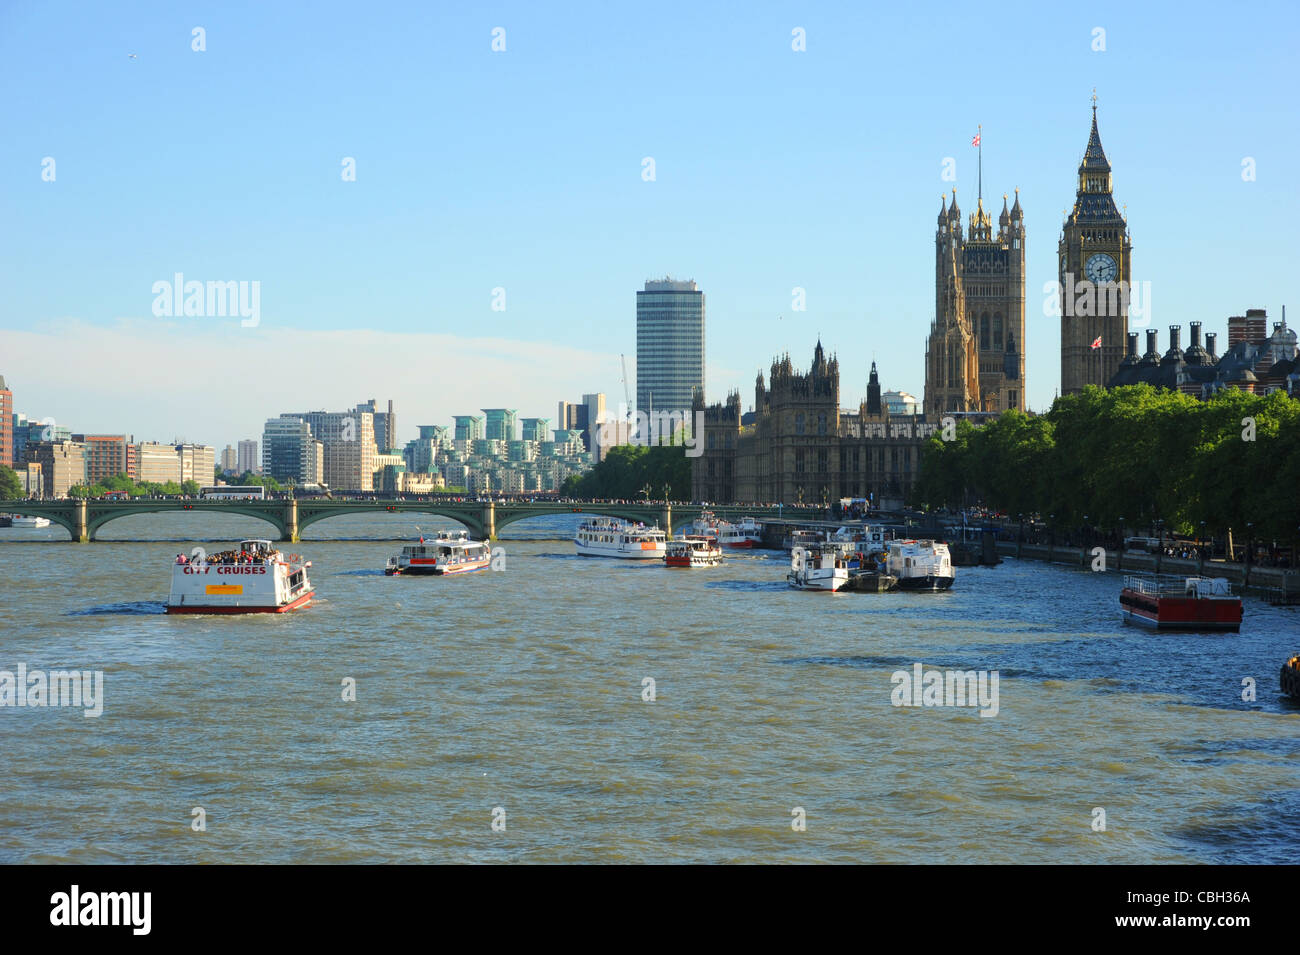 River Thames with water traffic, Westminster Bridge, Big Ben and the houses of parliament. Stock Photo